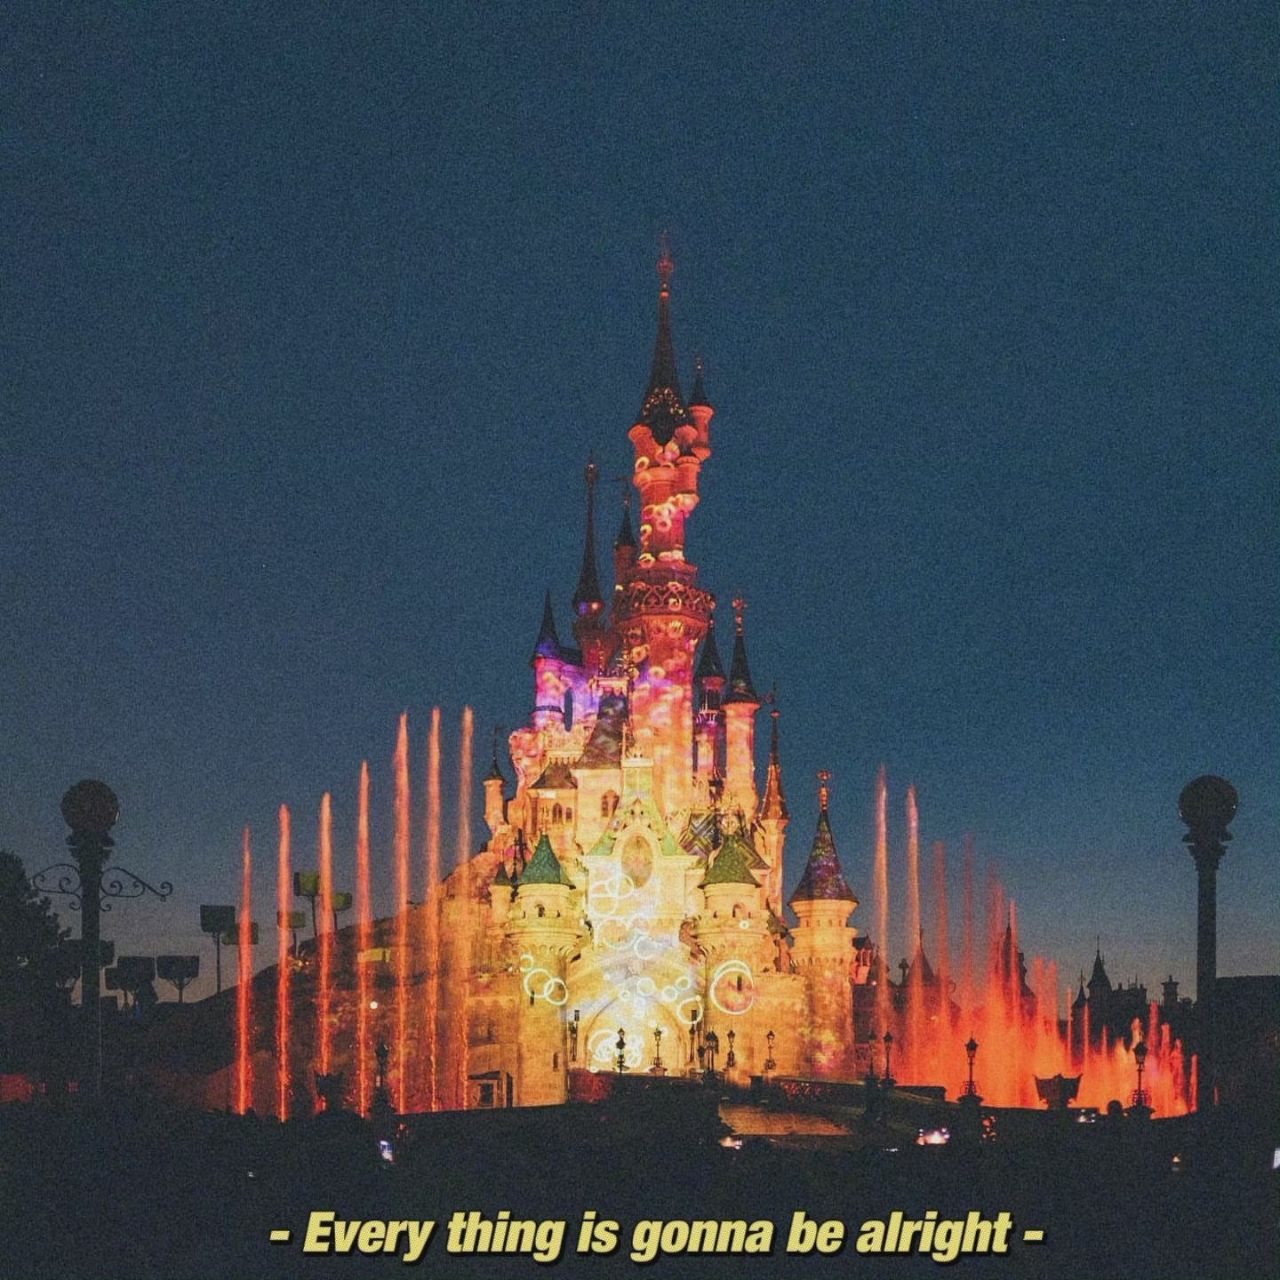 Every thing is gonna be alright